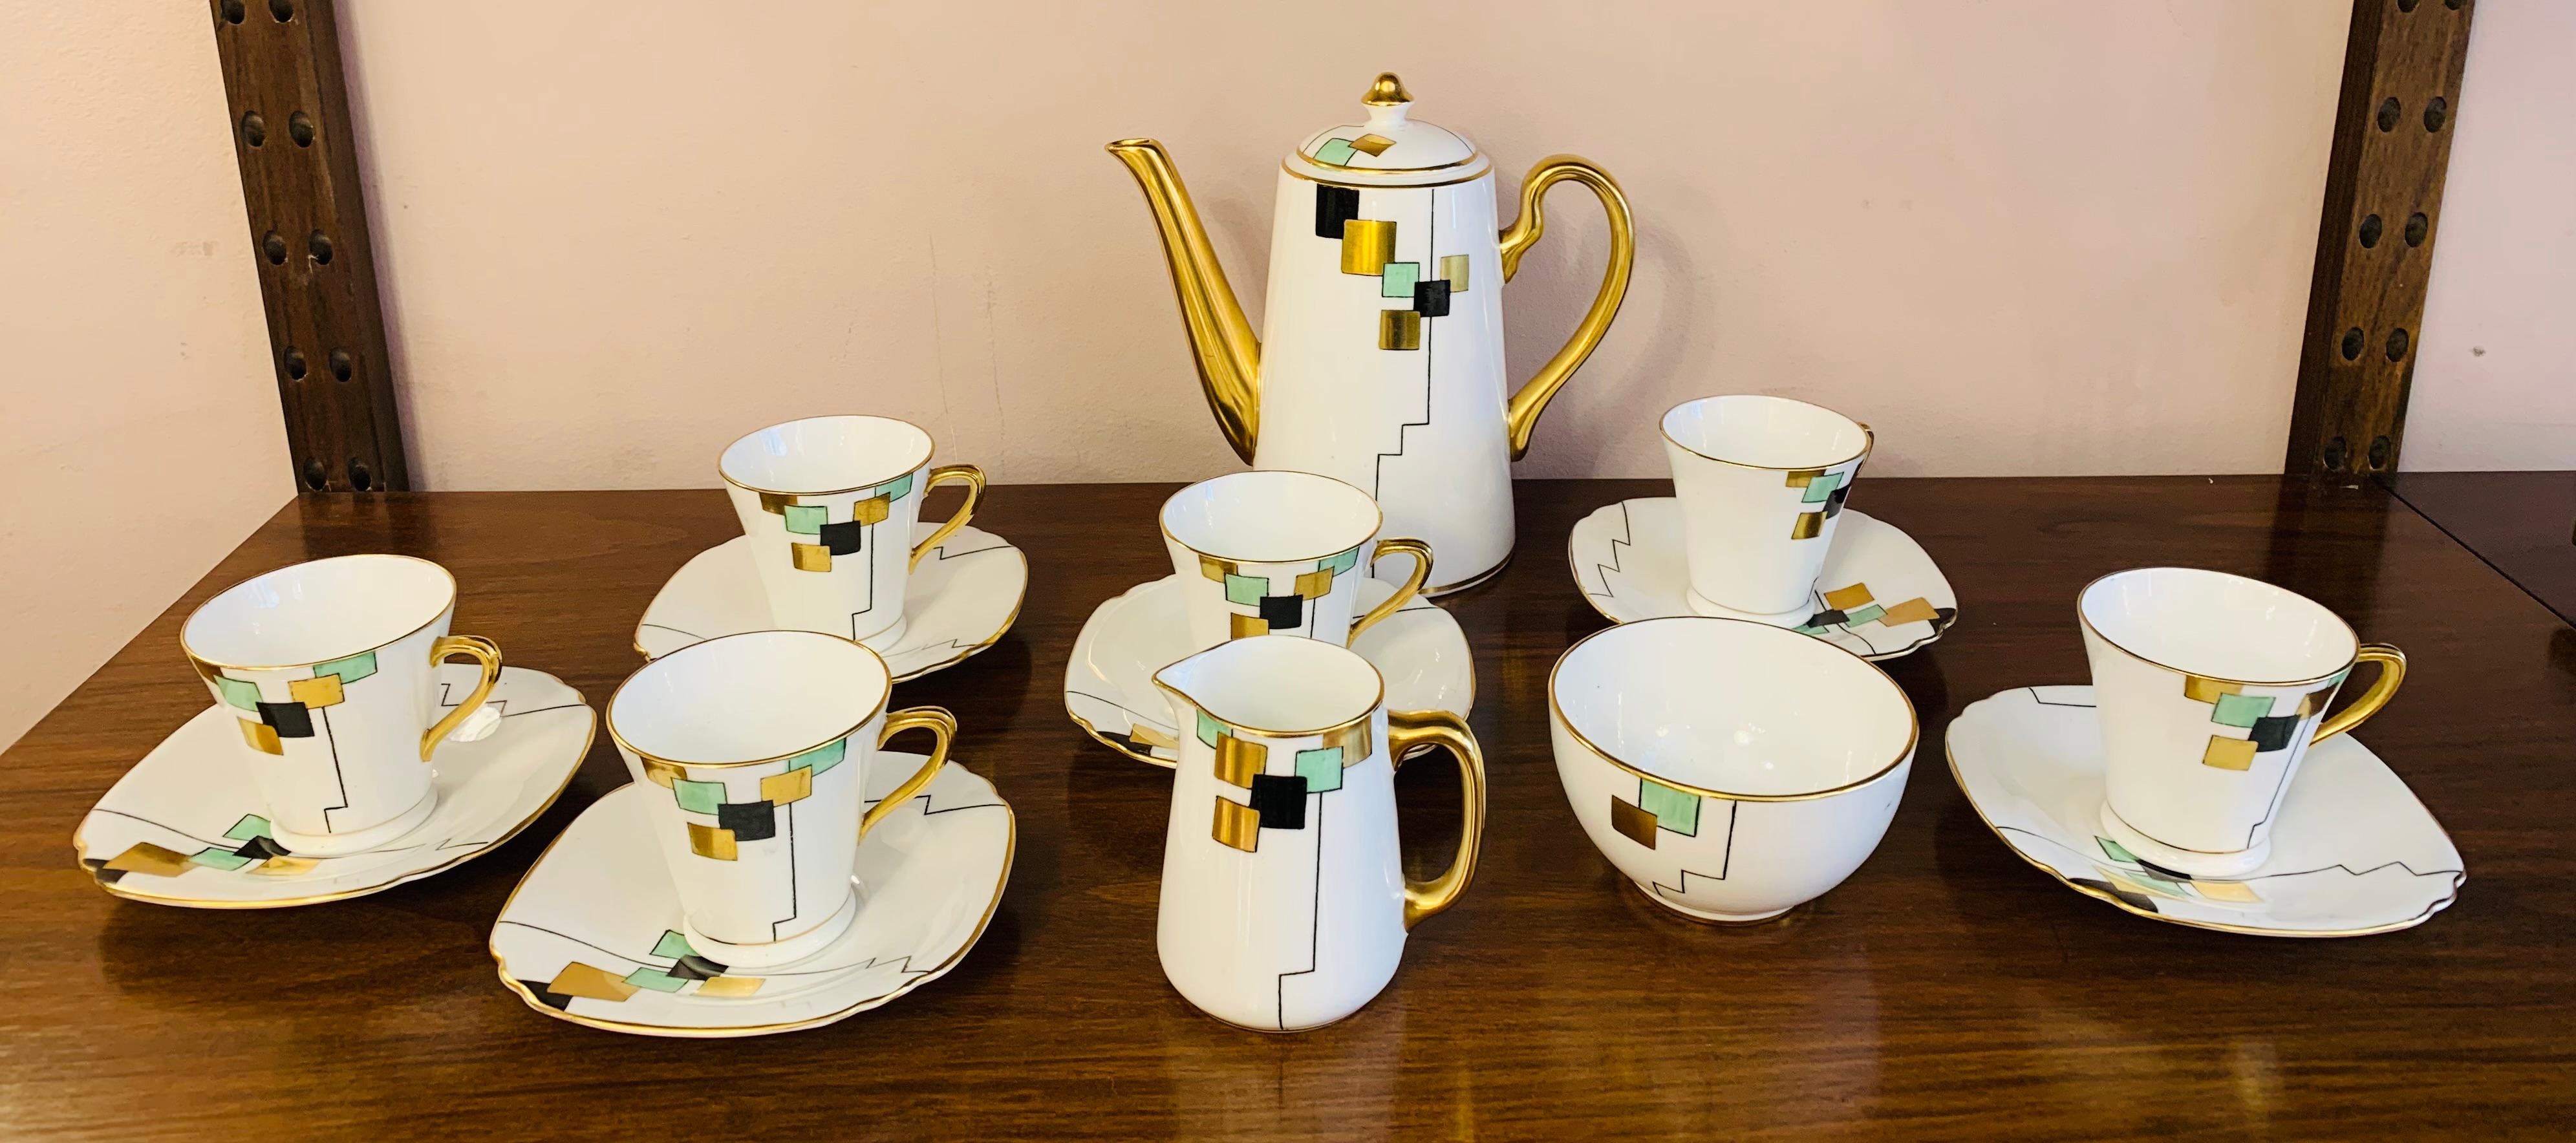 An unusual Art Deco coffee set comprising of: 6 cups with saucers. 1 coffee pot.  1 cream jug and 1 sugar bowl.

Manufactured and stamped on the bottom of each piece - Sadler.  Rode Heath. Stoke on Trent. ENGLAND. Hand painted with a cubist pattern